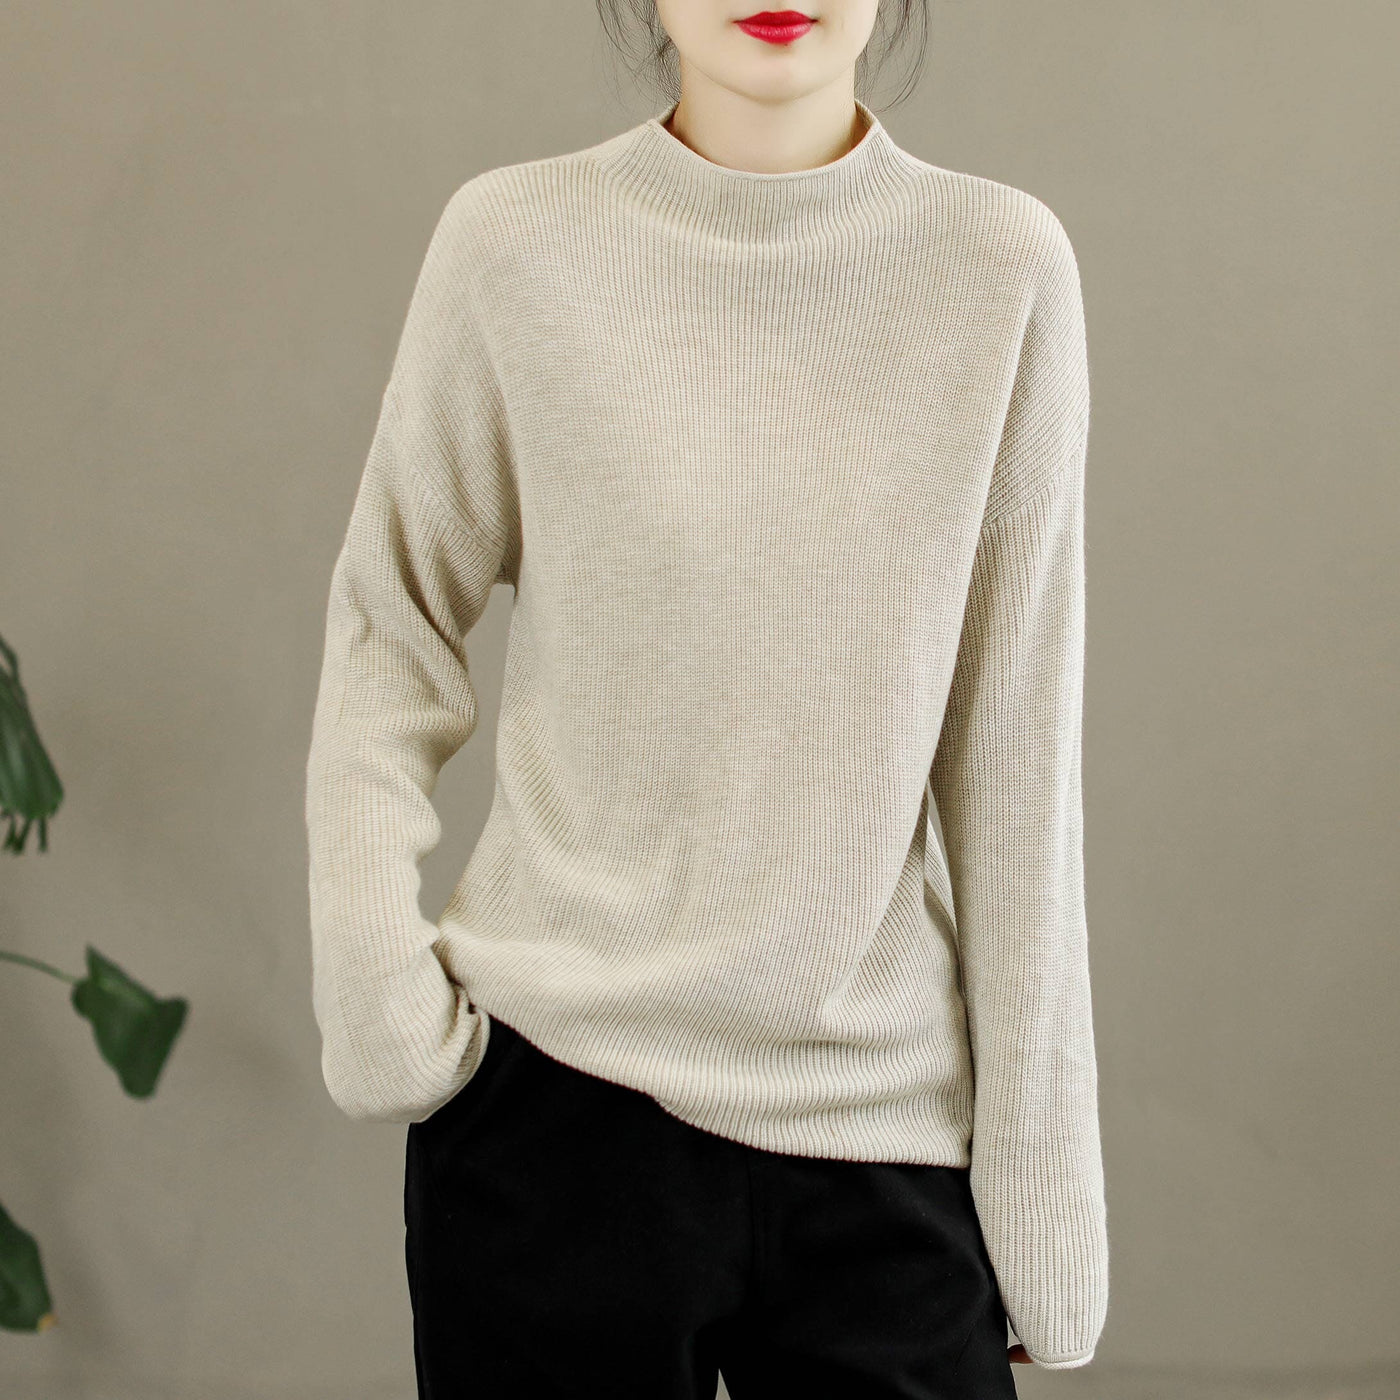 Autumn Winter Loose Solid Knitted Round Neck Sweater Nov 2022 New Arrival One Size Beige 